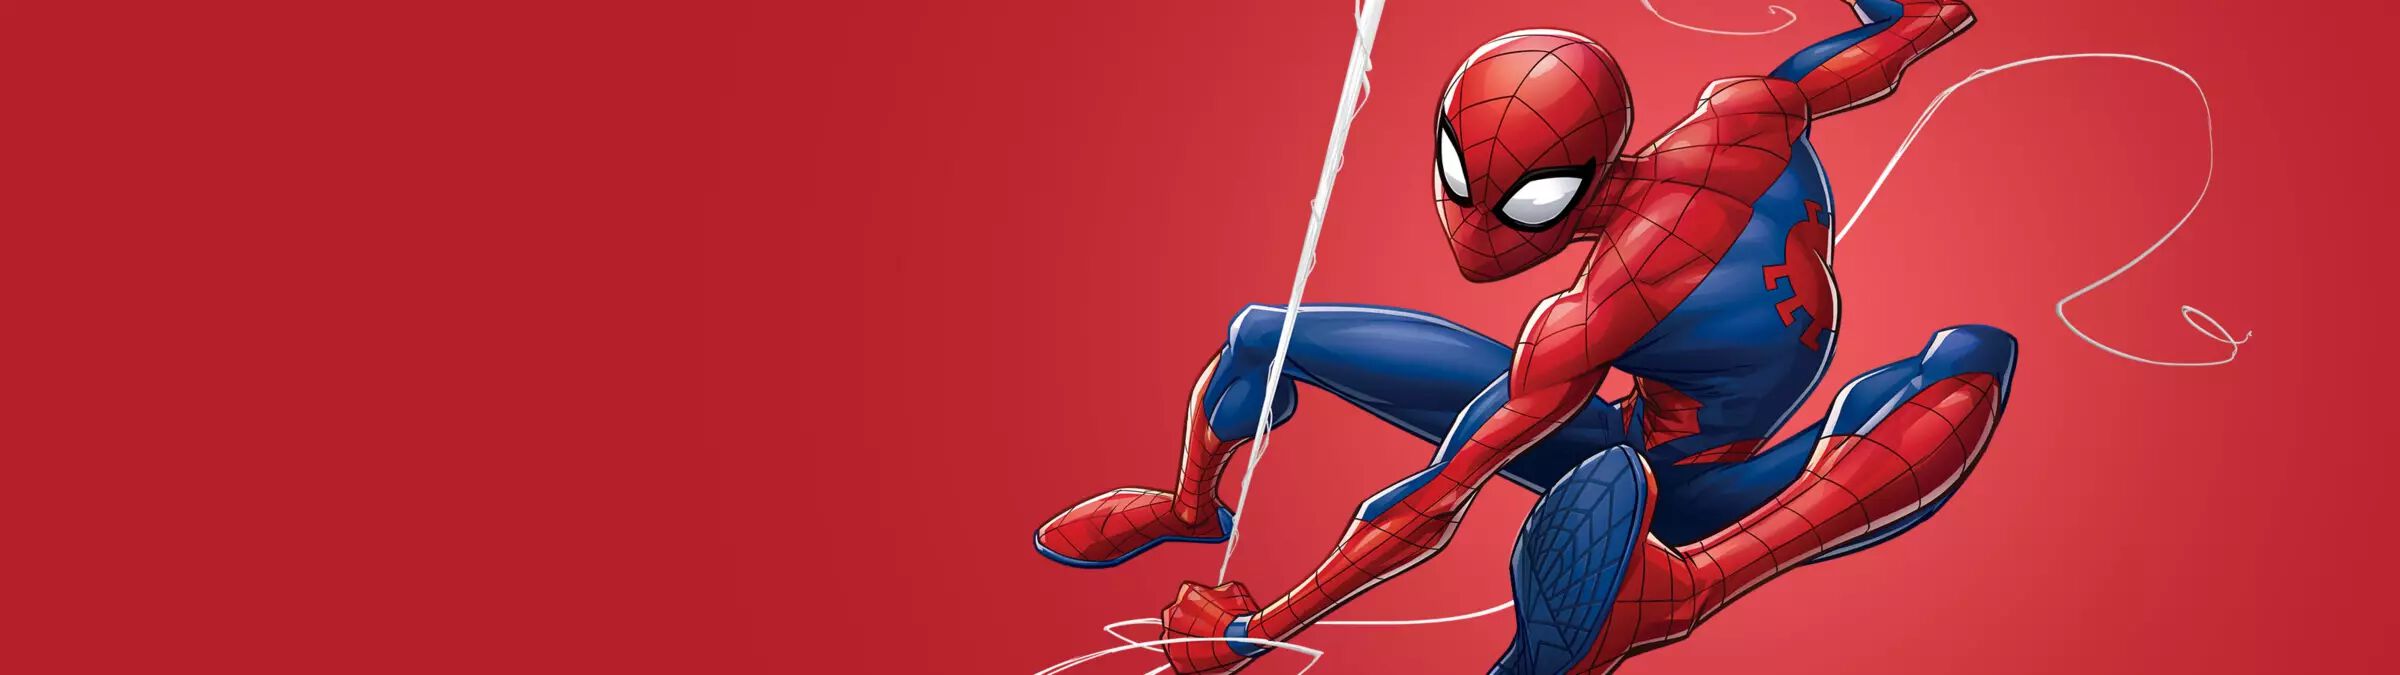 Spider-Man swinging from a web showcased on a red background